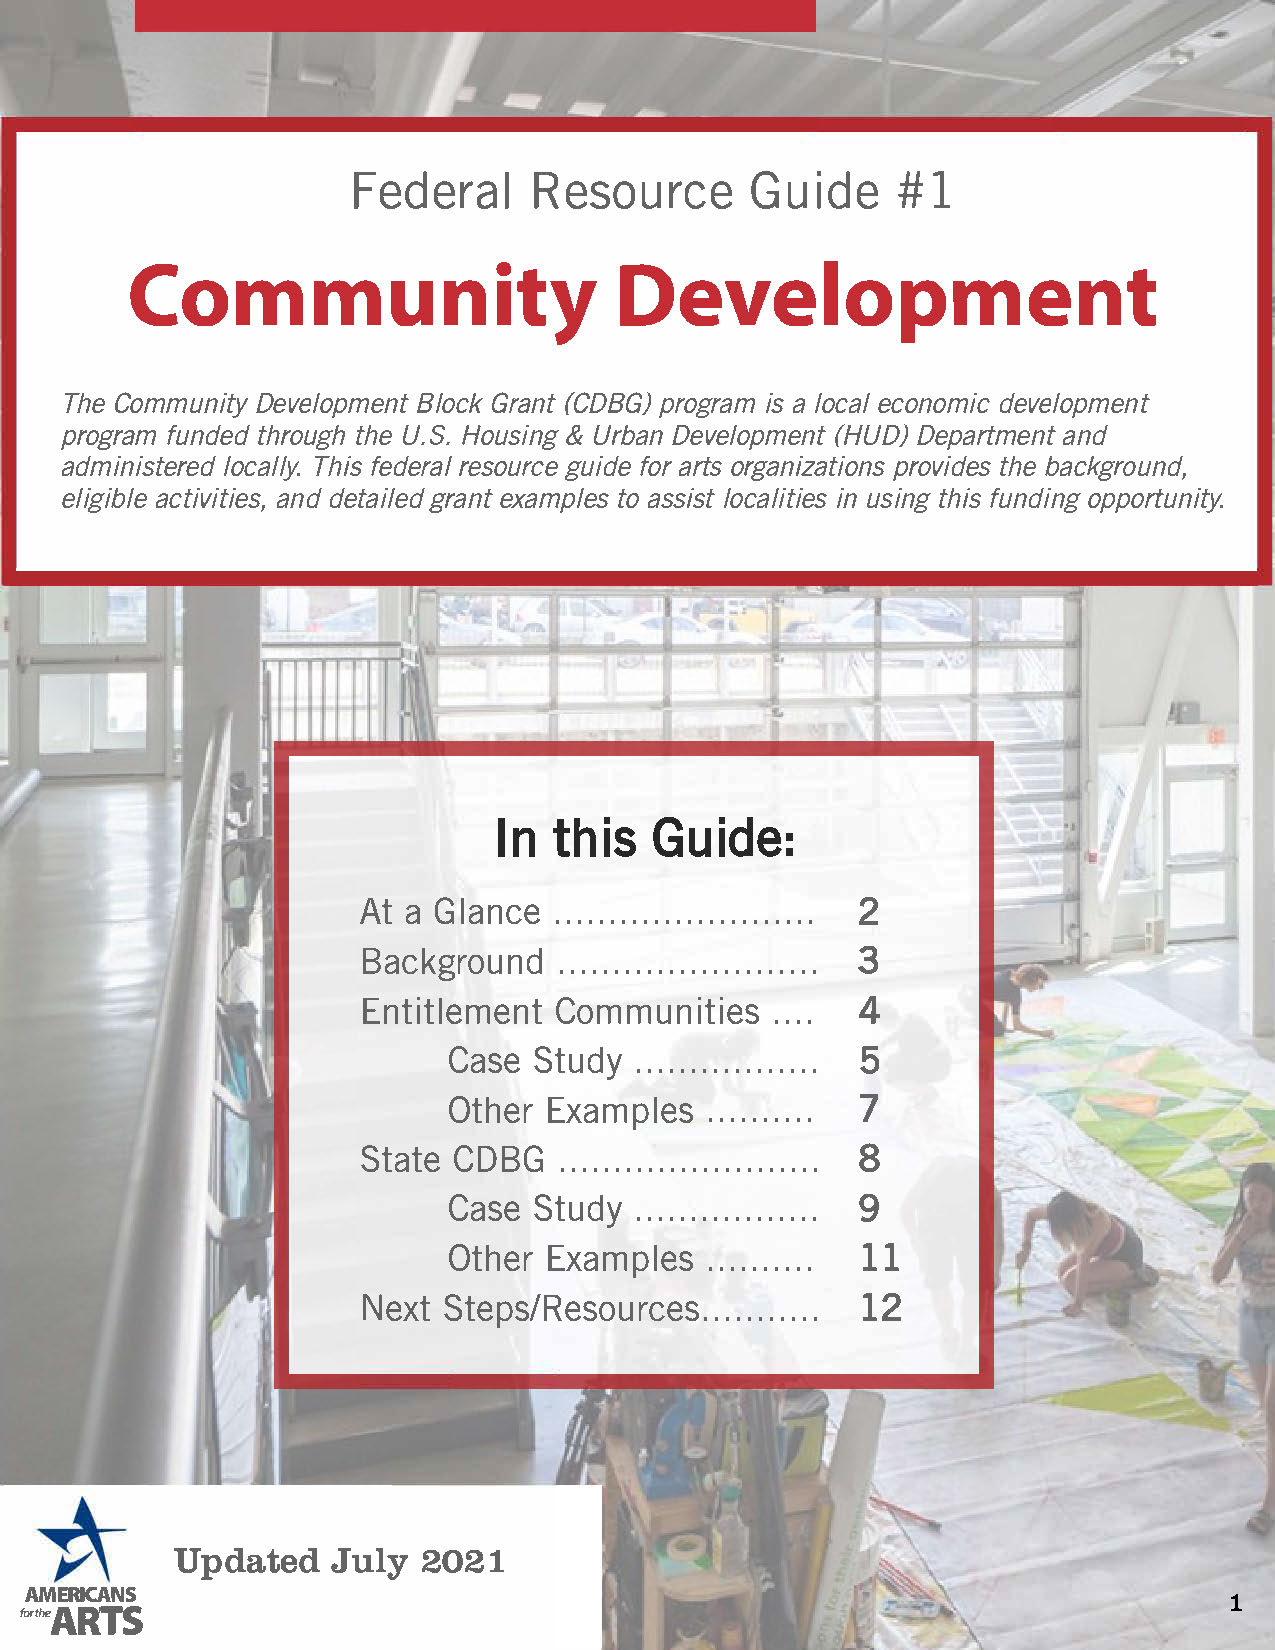 A thumnail cover image of the Community Development guide, featuring an image of a large garage space with artists working on a project on the ground